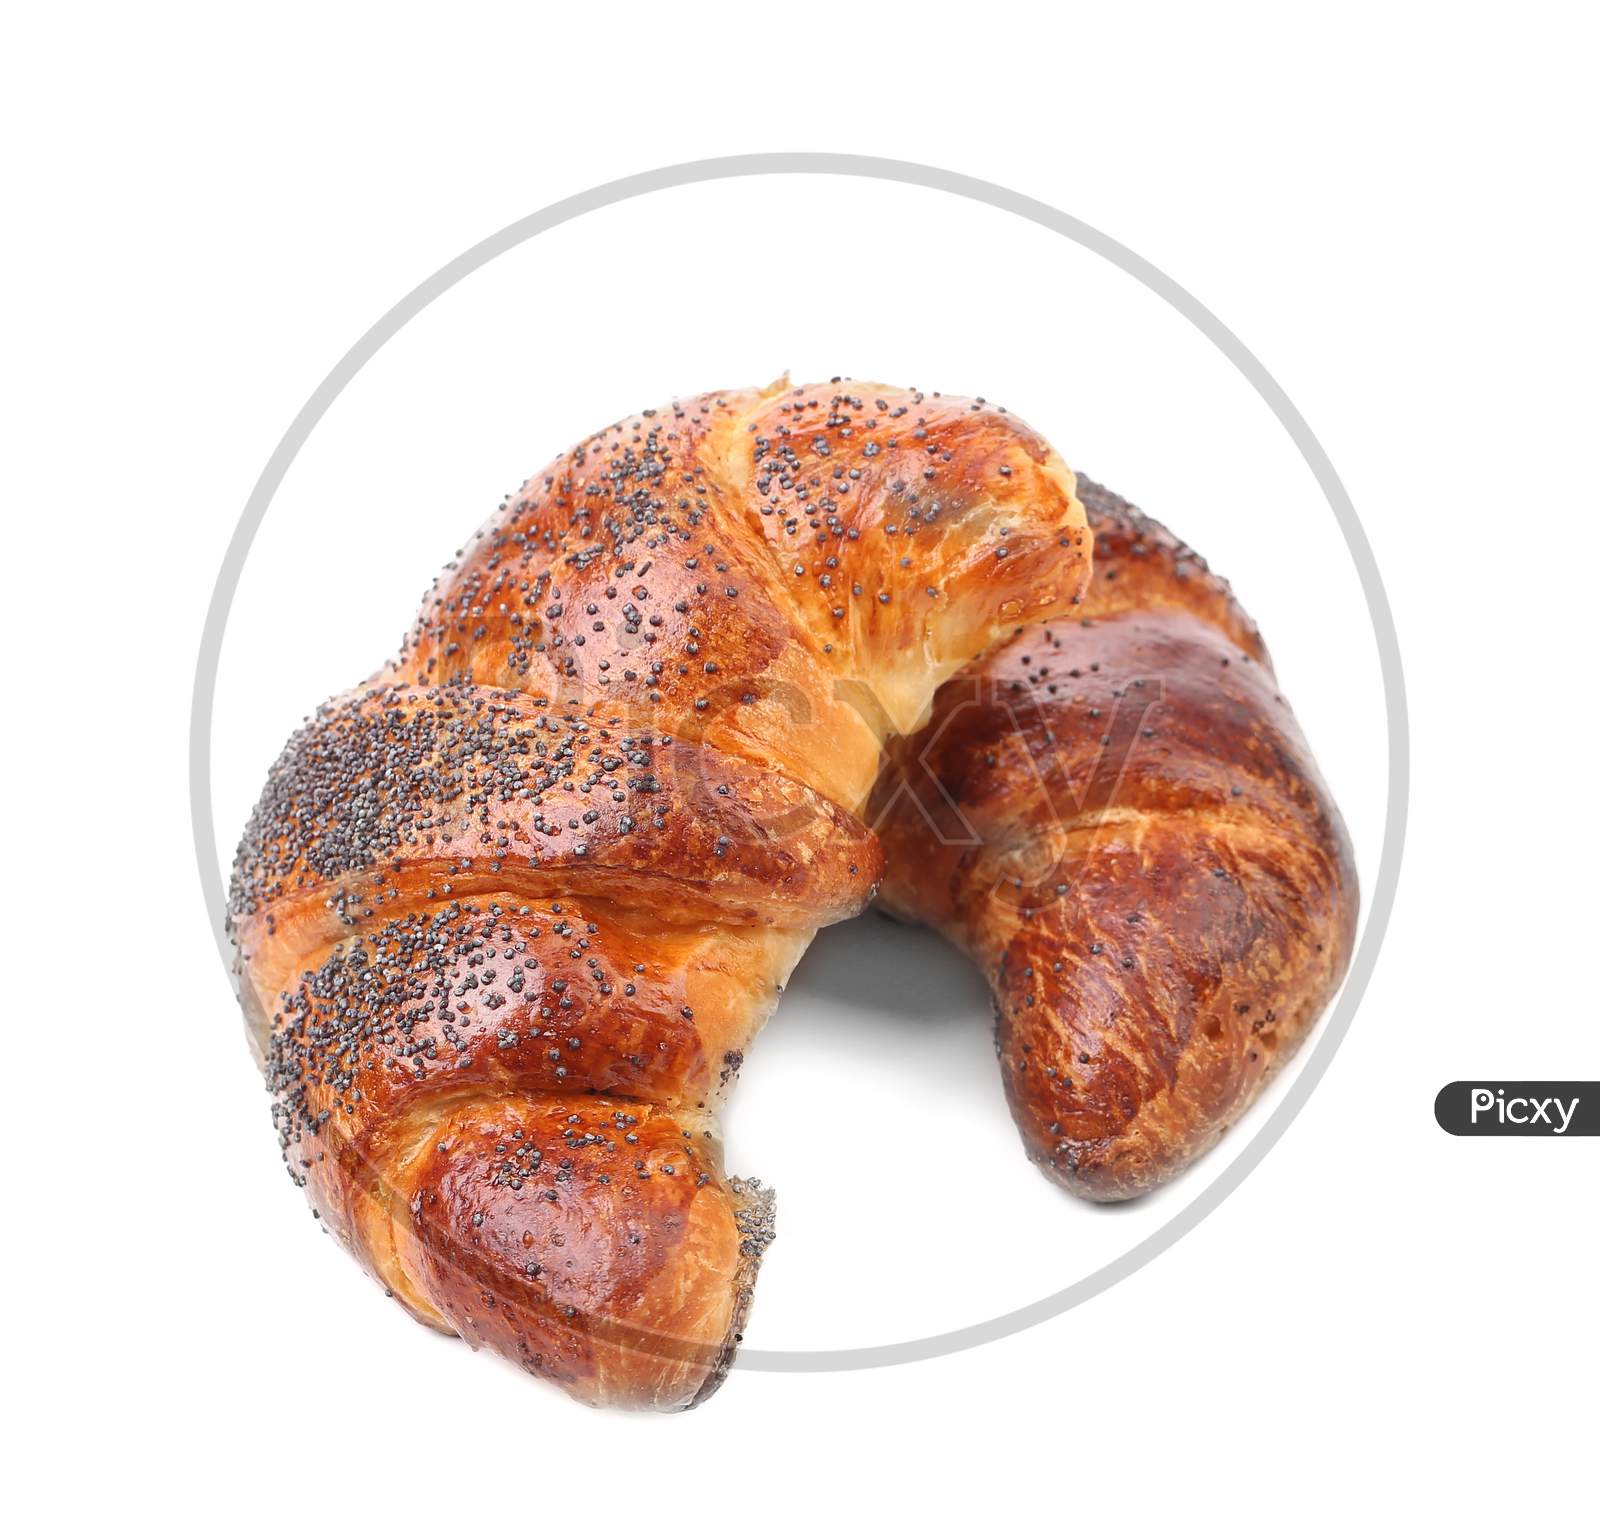 Appetizing Croissants With Poppy. Isolated On A White Background.